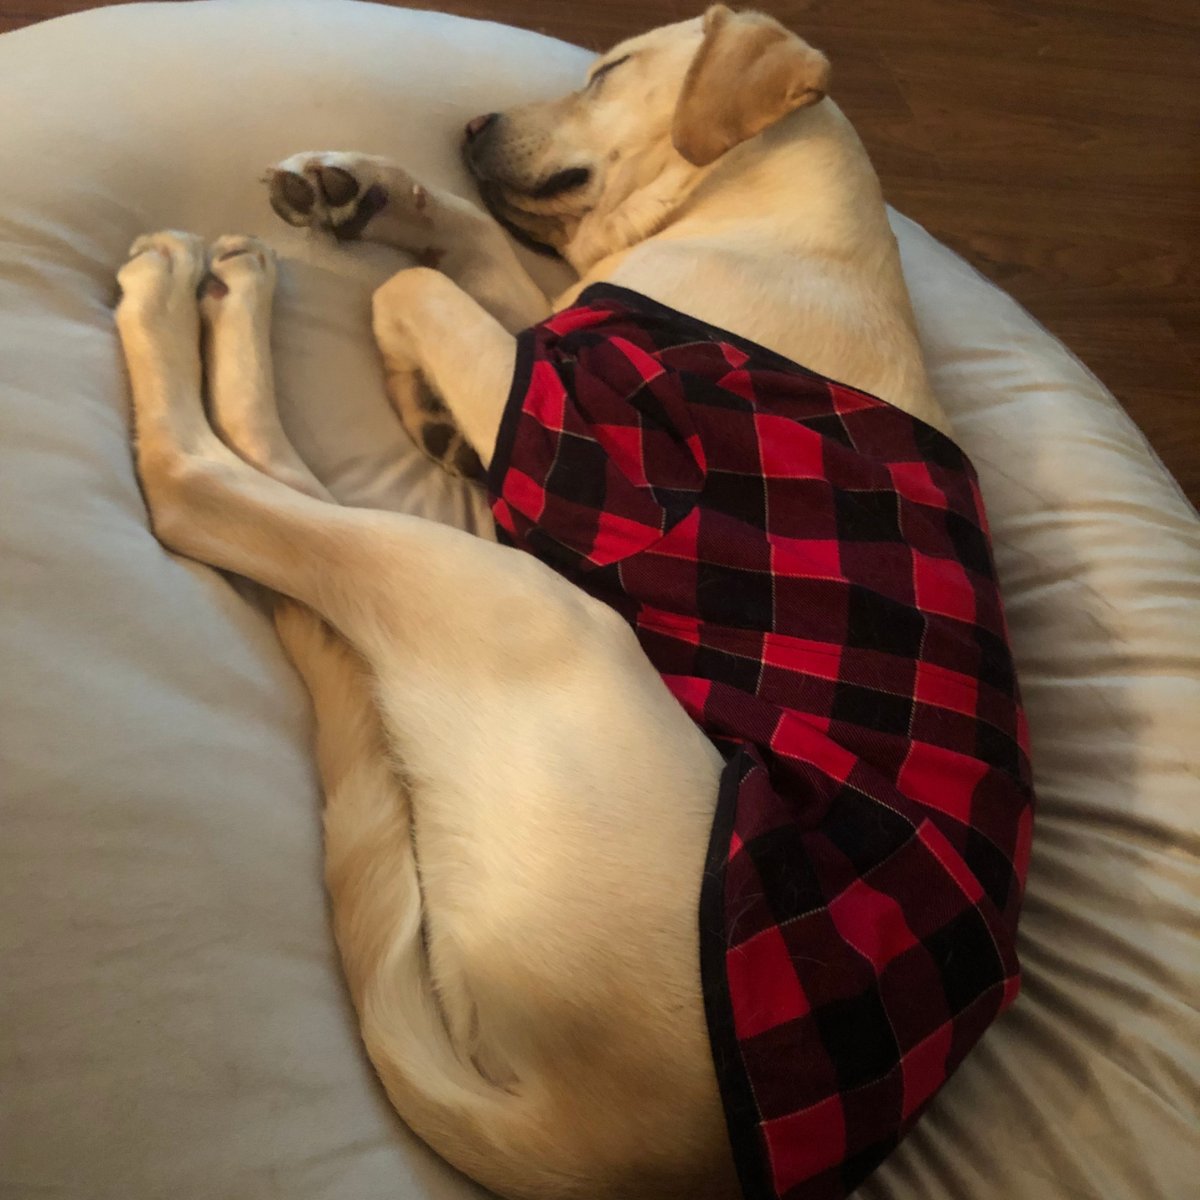 PADS Thresher wants to remind everyone to get lots of sleep this #WellnessWednesday! Summer is full of so many fun activities, but it's still important to make sure both humans and pups are getting lots of breaks in between their summer fun times. 😴